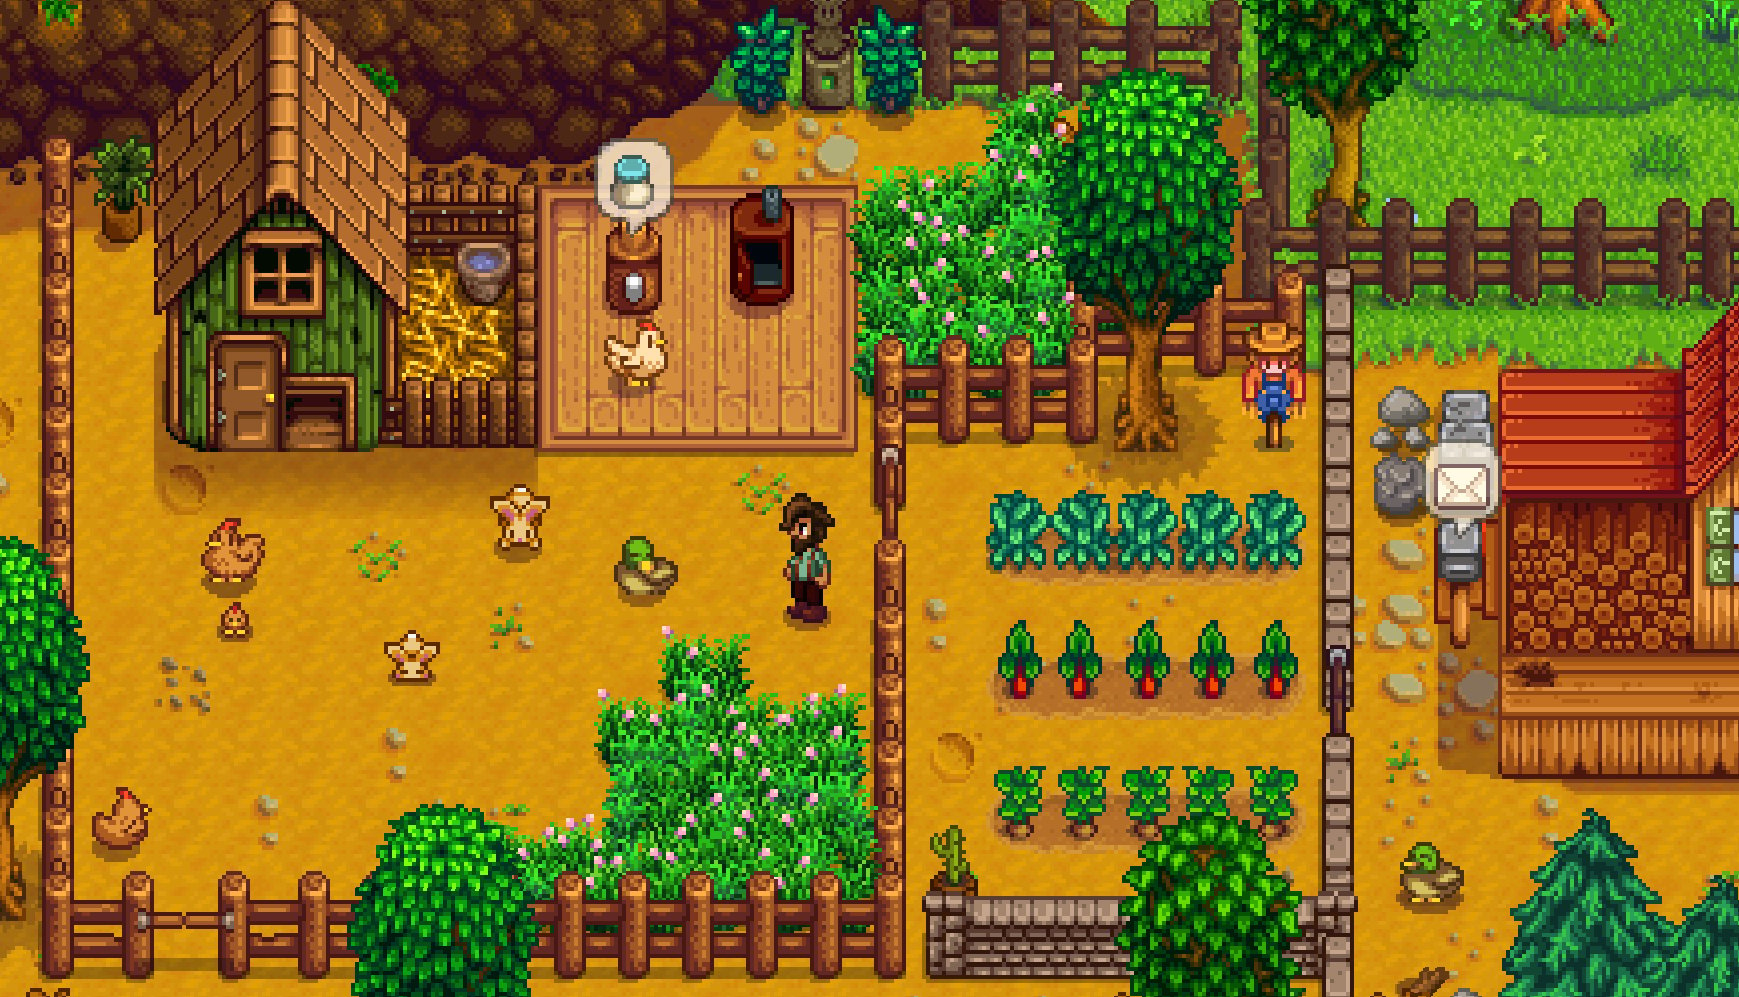 Stardew Valley on Nintendo Switch now has multiplayer for co-op farming  online or via local wireless